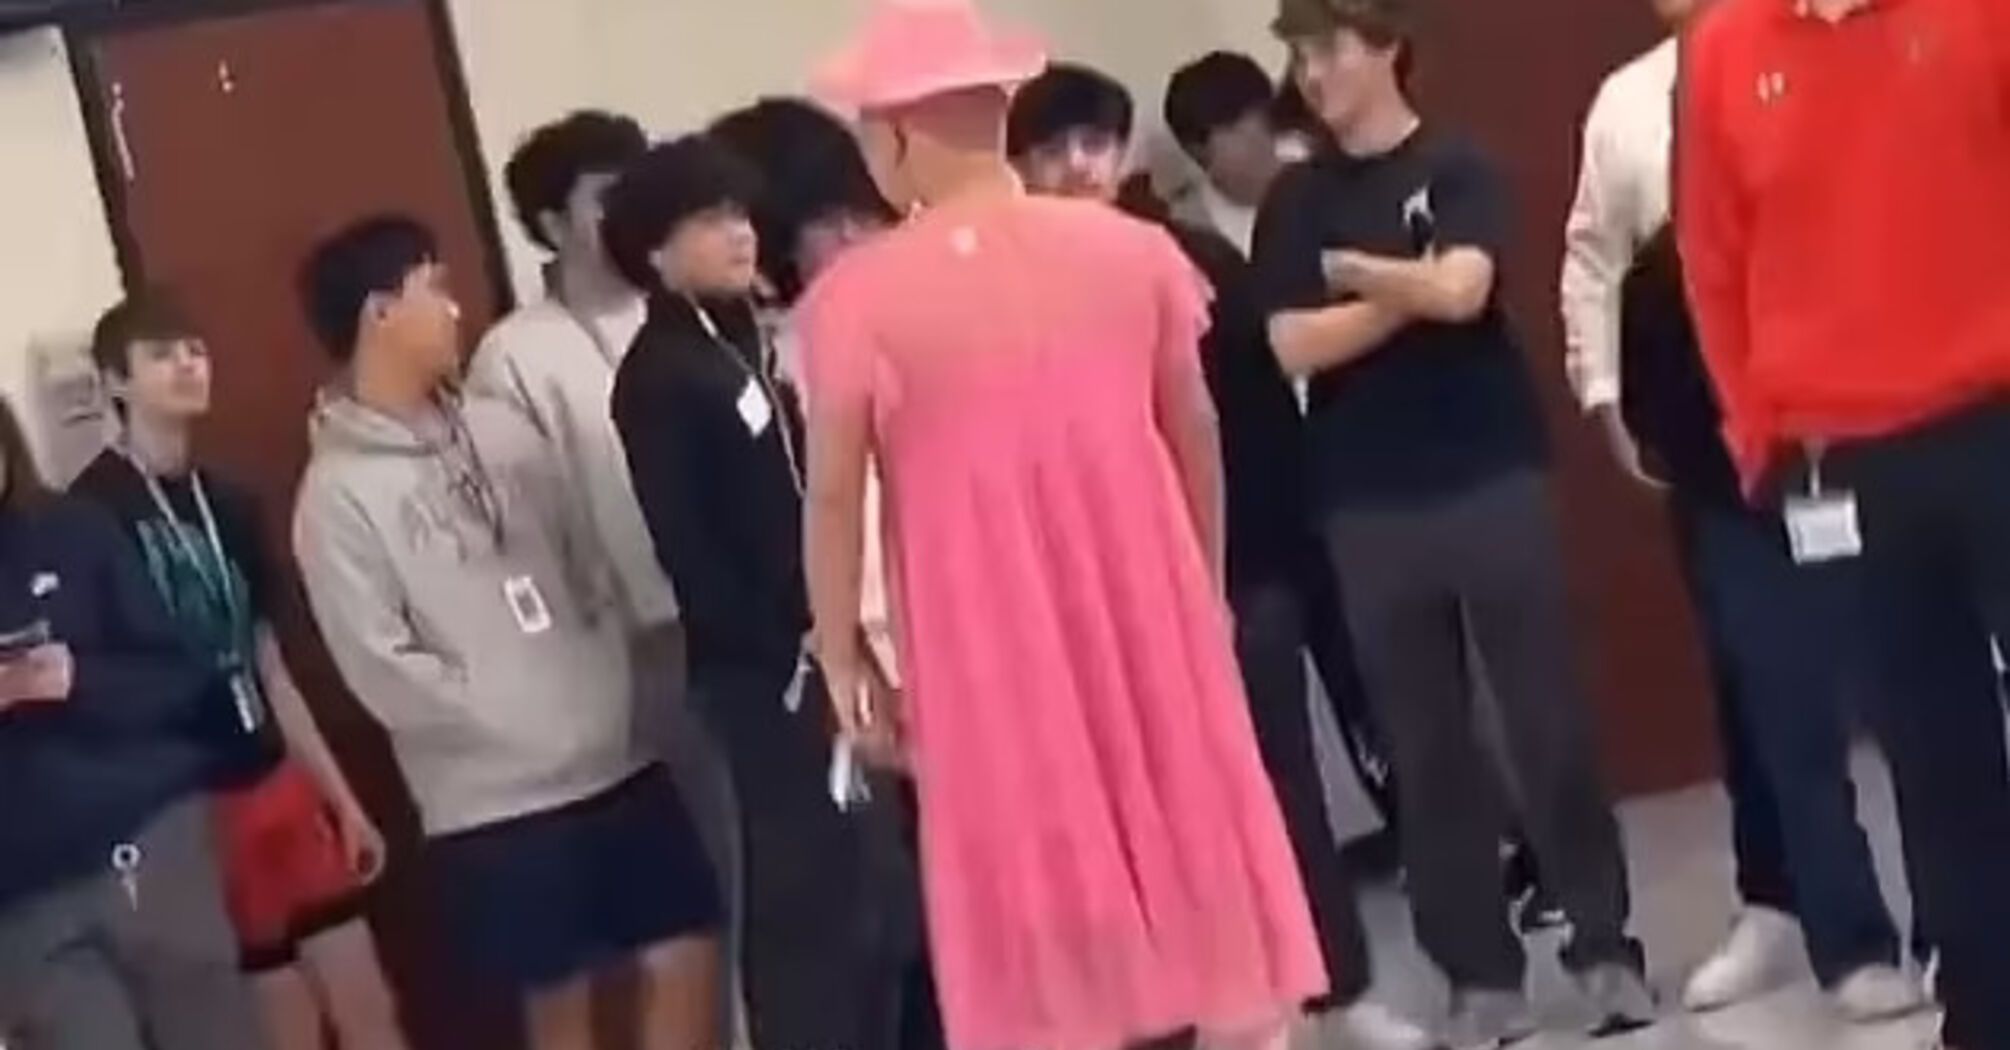 Teacher suspended after video shows him walking around school in a dress